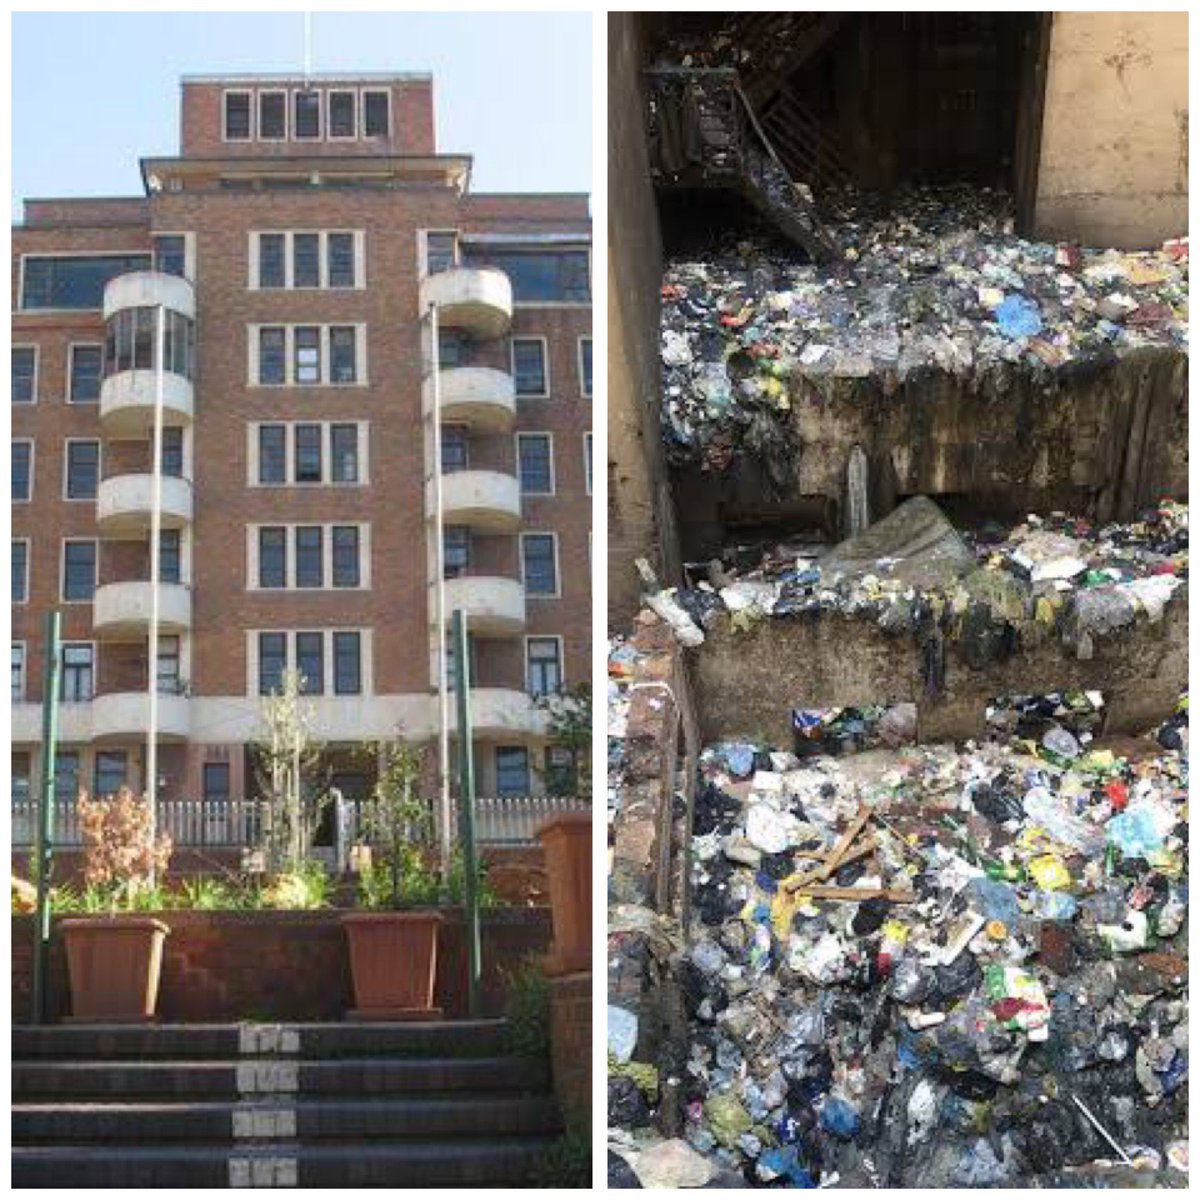 Hillbrow Hospital/Florence Nightingale in the 90s (where I worked as a speech therapist) and Hillbrow Hospital today. 

If the ANC could not maintain and advance this once beautiful hospital over the last 30 years, please explain how the NHI is a good idea for the people of this